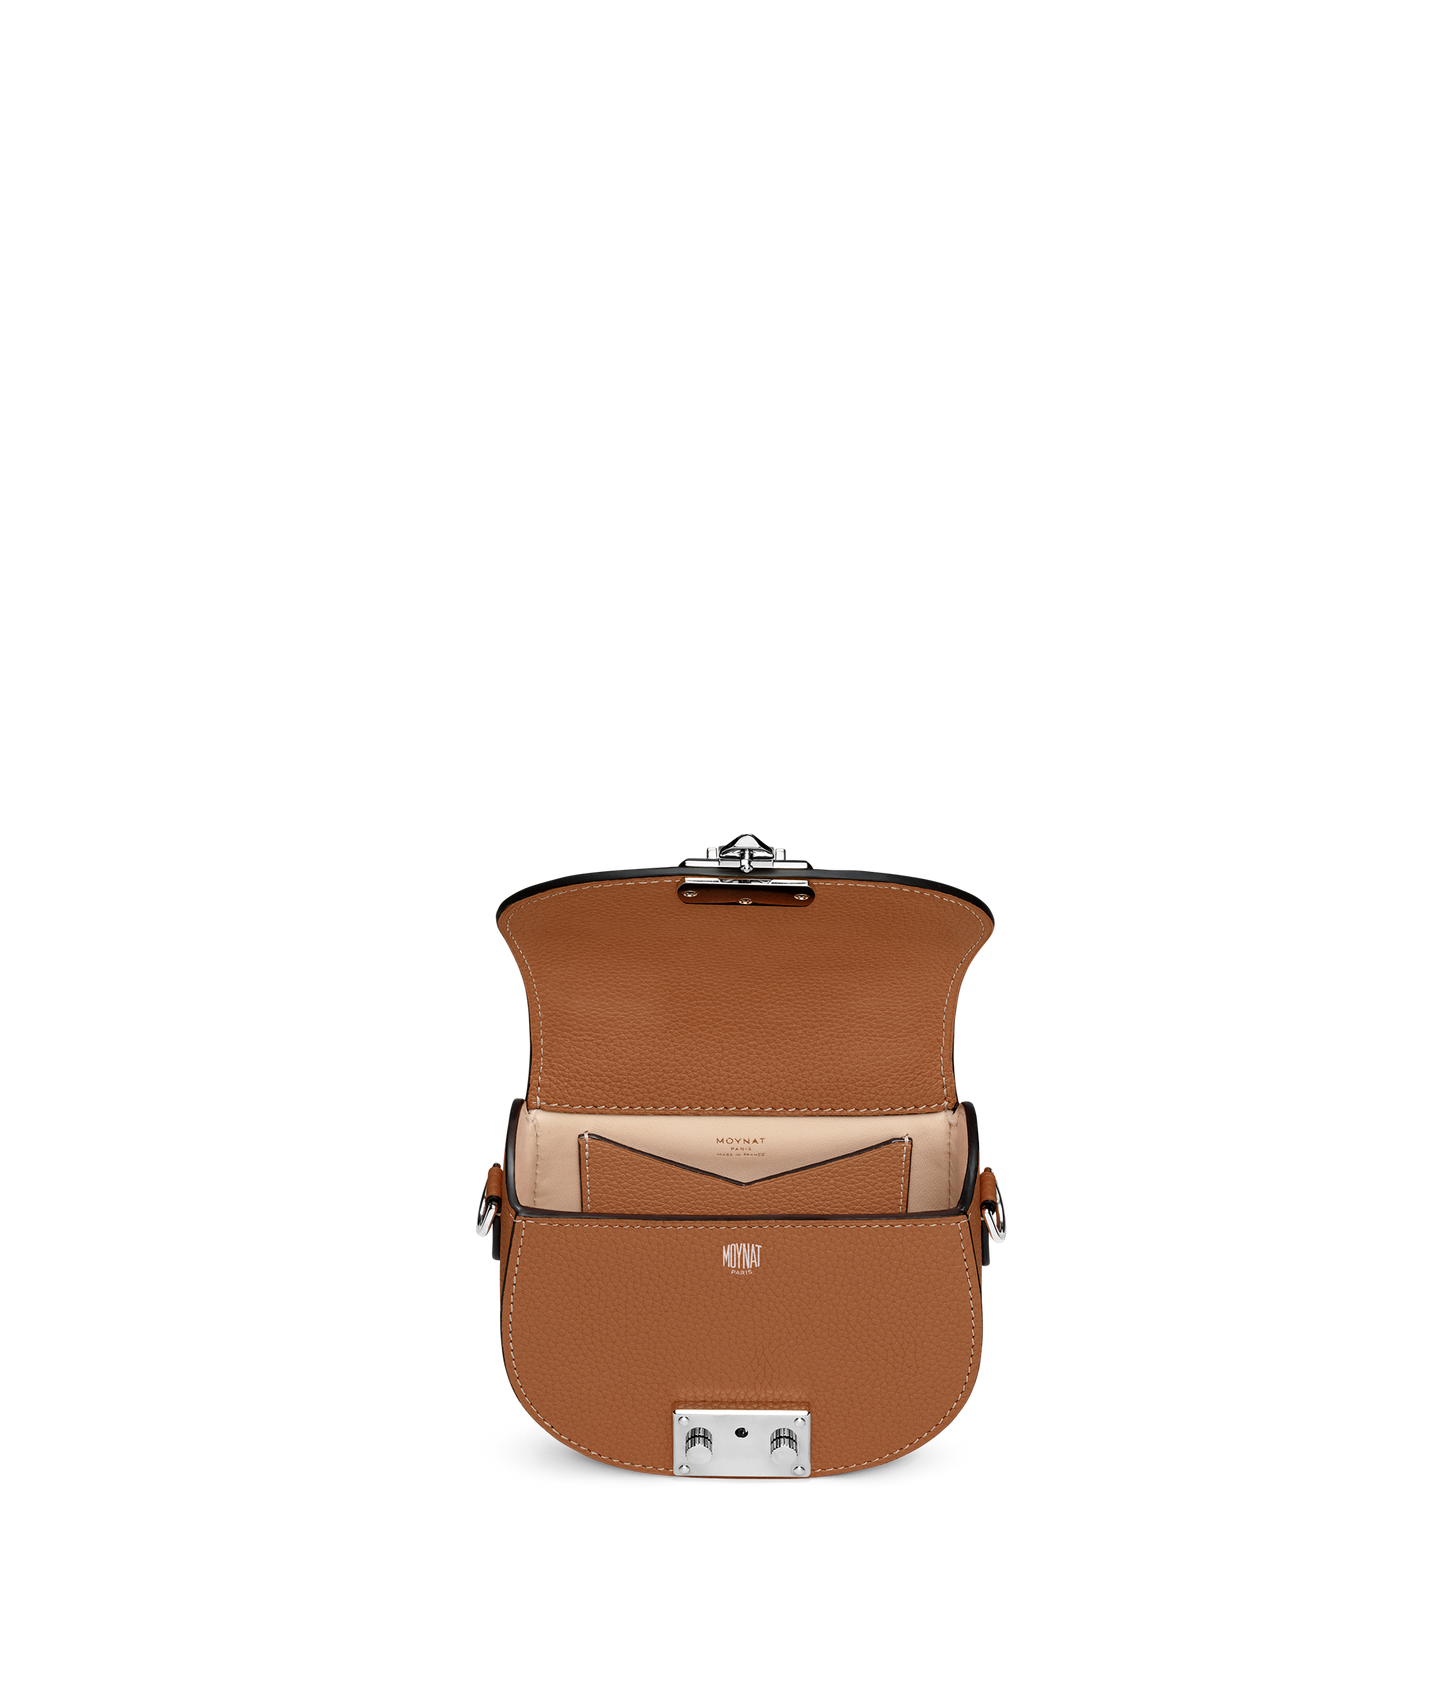 Moynat's Flori Nano Now Comes In Cannelle & Regiment - BAGAHOLICBOY